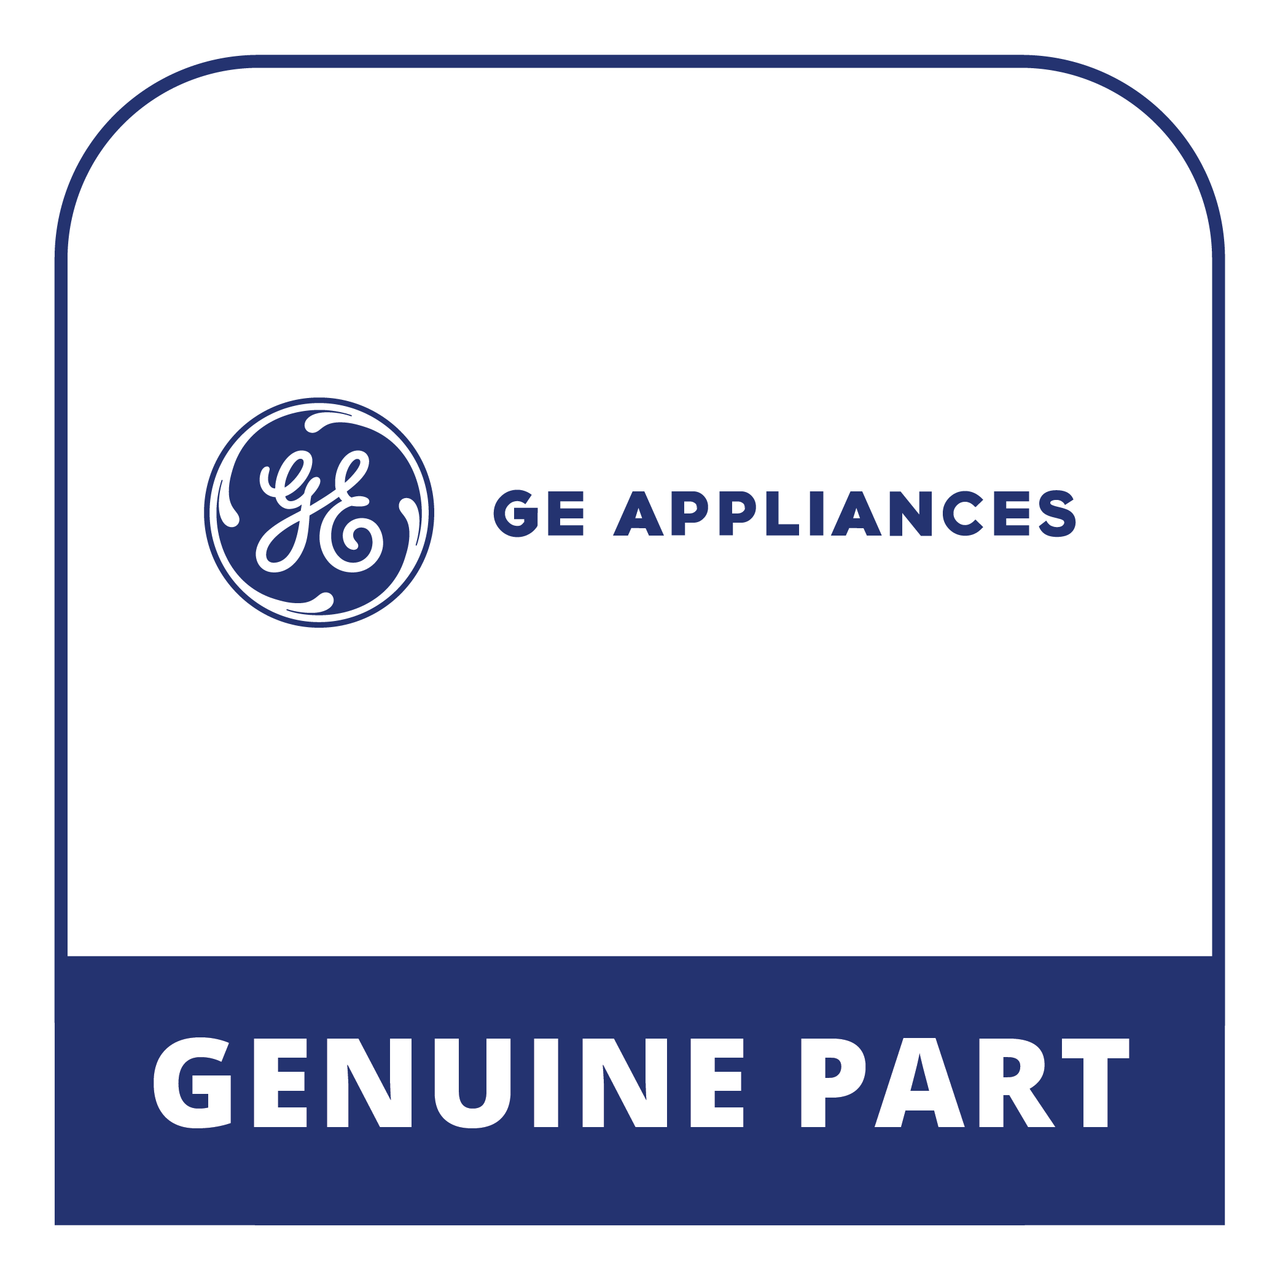 GE Appliances WB27T11460 - Overlay - Genuine Part